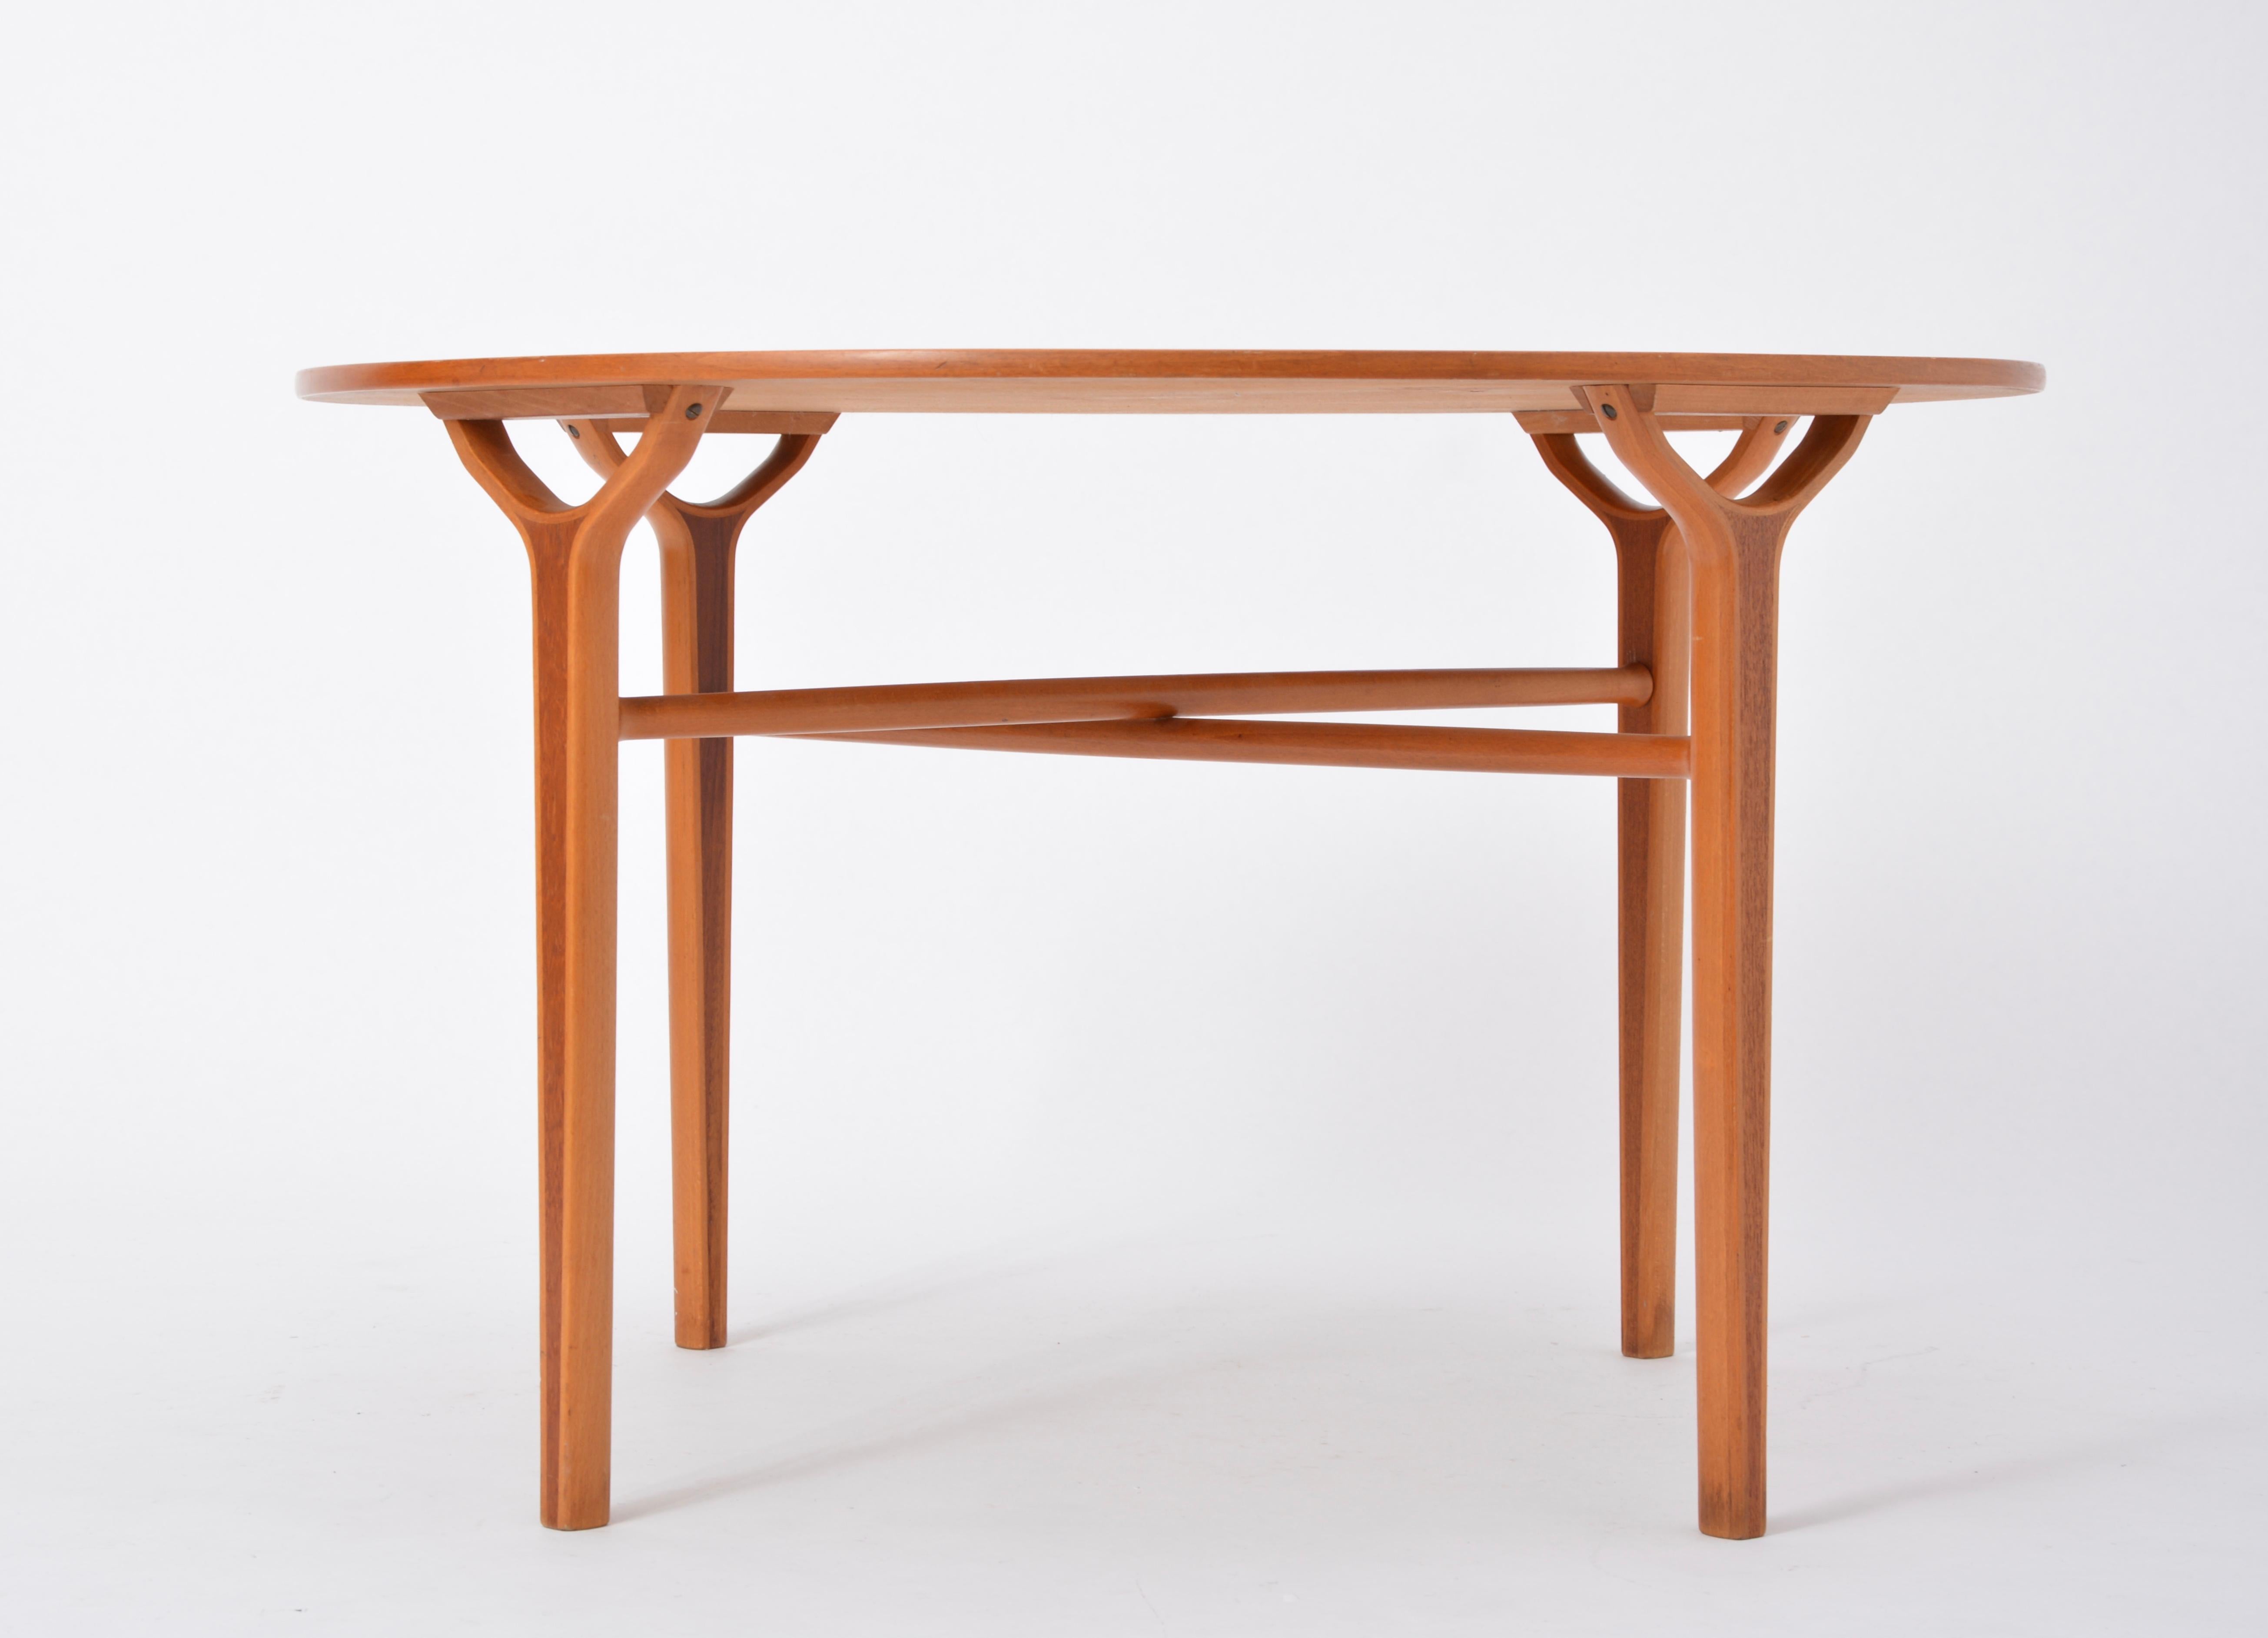 Danish Mid-Century Modern Ax table by Peter Hvidt and Orla Mølgaard-Nielsen In Good Condition For Sale In Berlin, DE